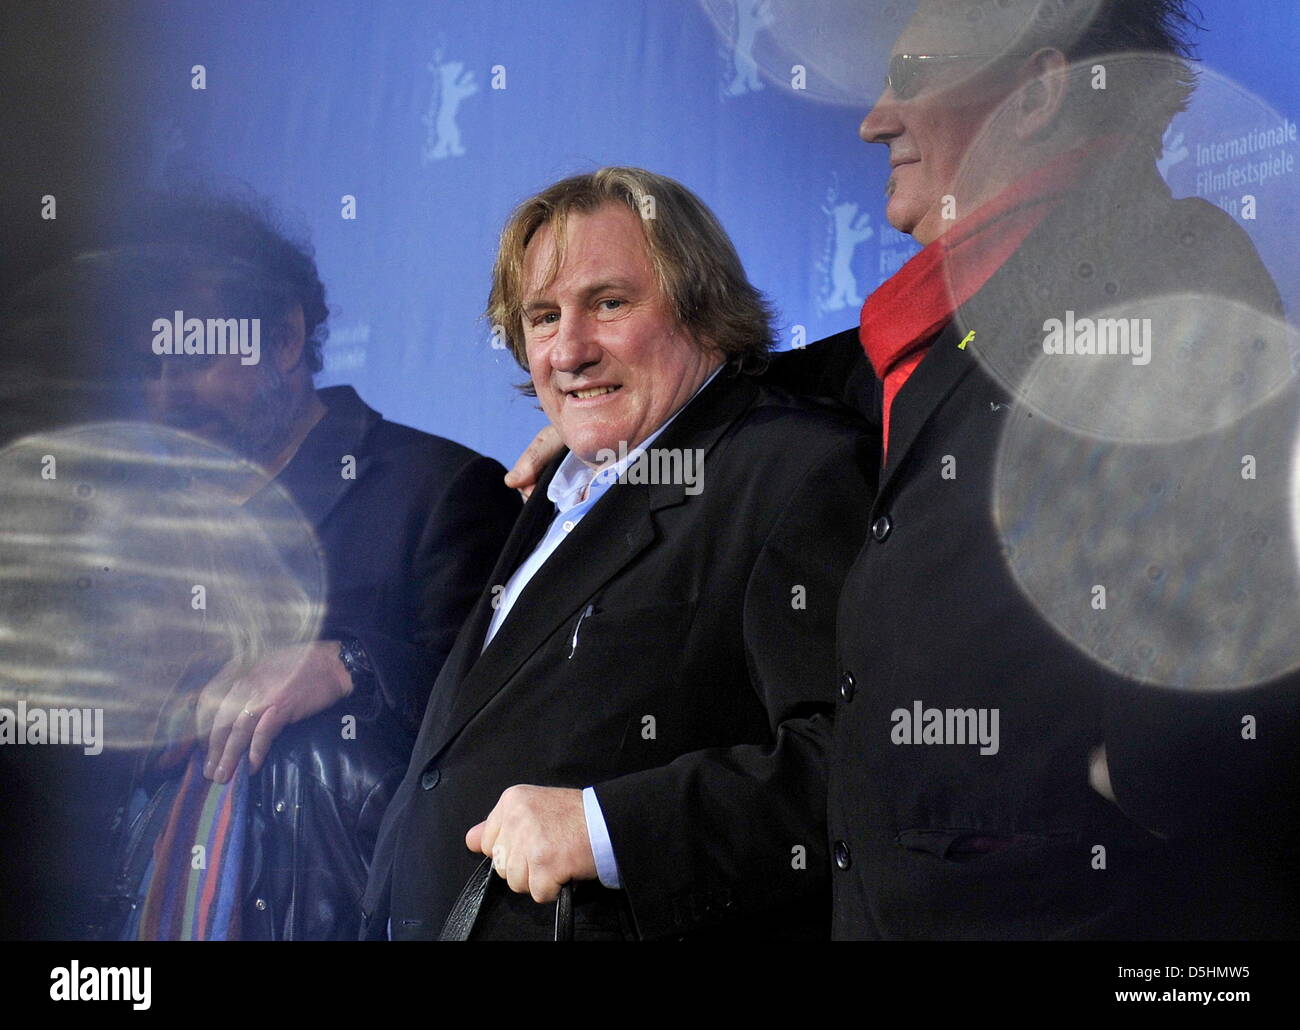 French directors Benoit Delepine (R) and Gustave Kervern (L) pose with French actor Gerard Depardieu during the photocall of the film 'Mammuth' running in competition during the 60th Berlinale International Film Festival in Berlin, Germany, Friday, 19 February 2010. The festival runs until 21 February 2010. Photo: Jörg Carstensen dpa/lbn  +++(c) dpa - Bildfunk+++ Stock Photo